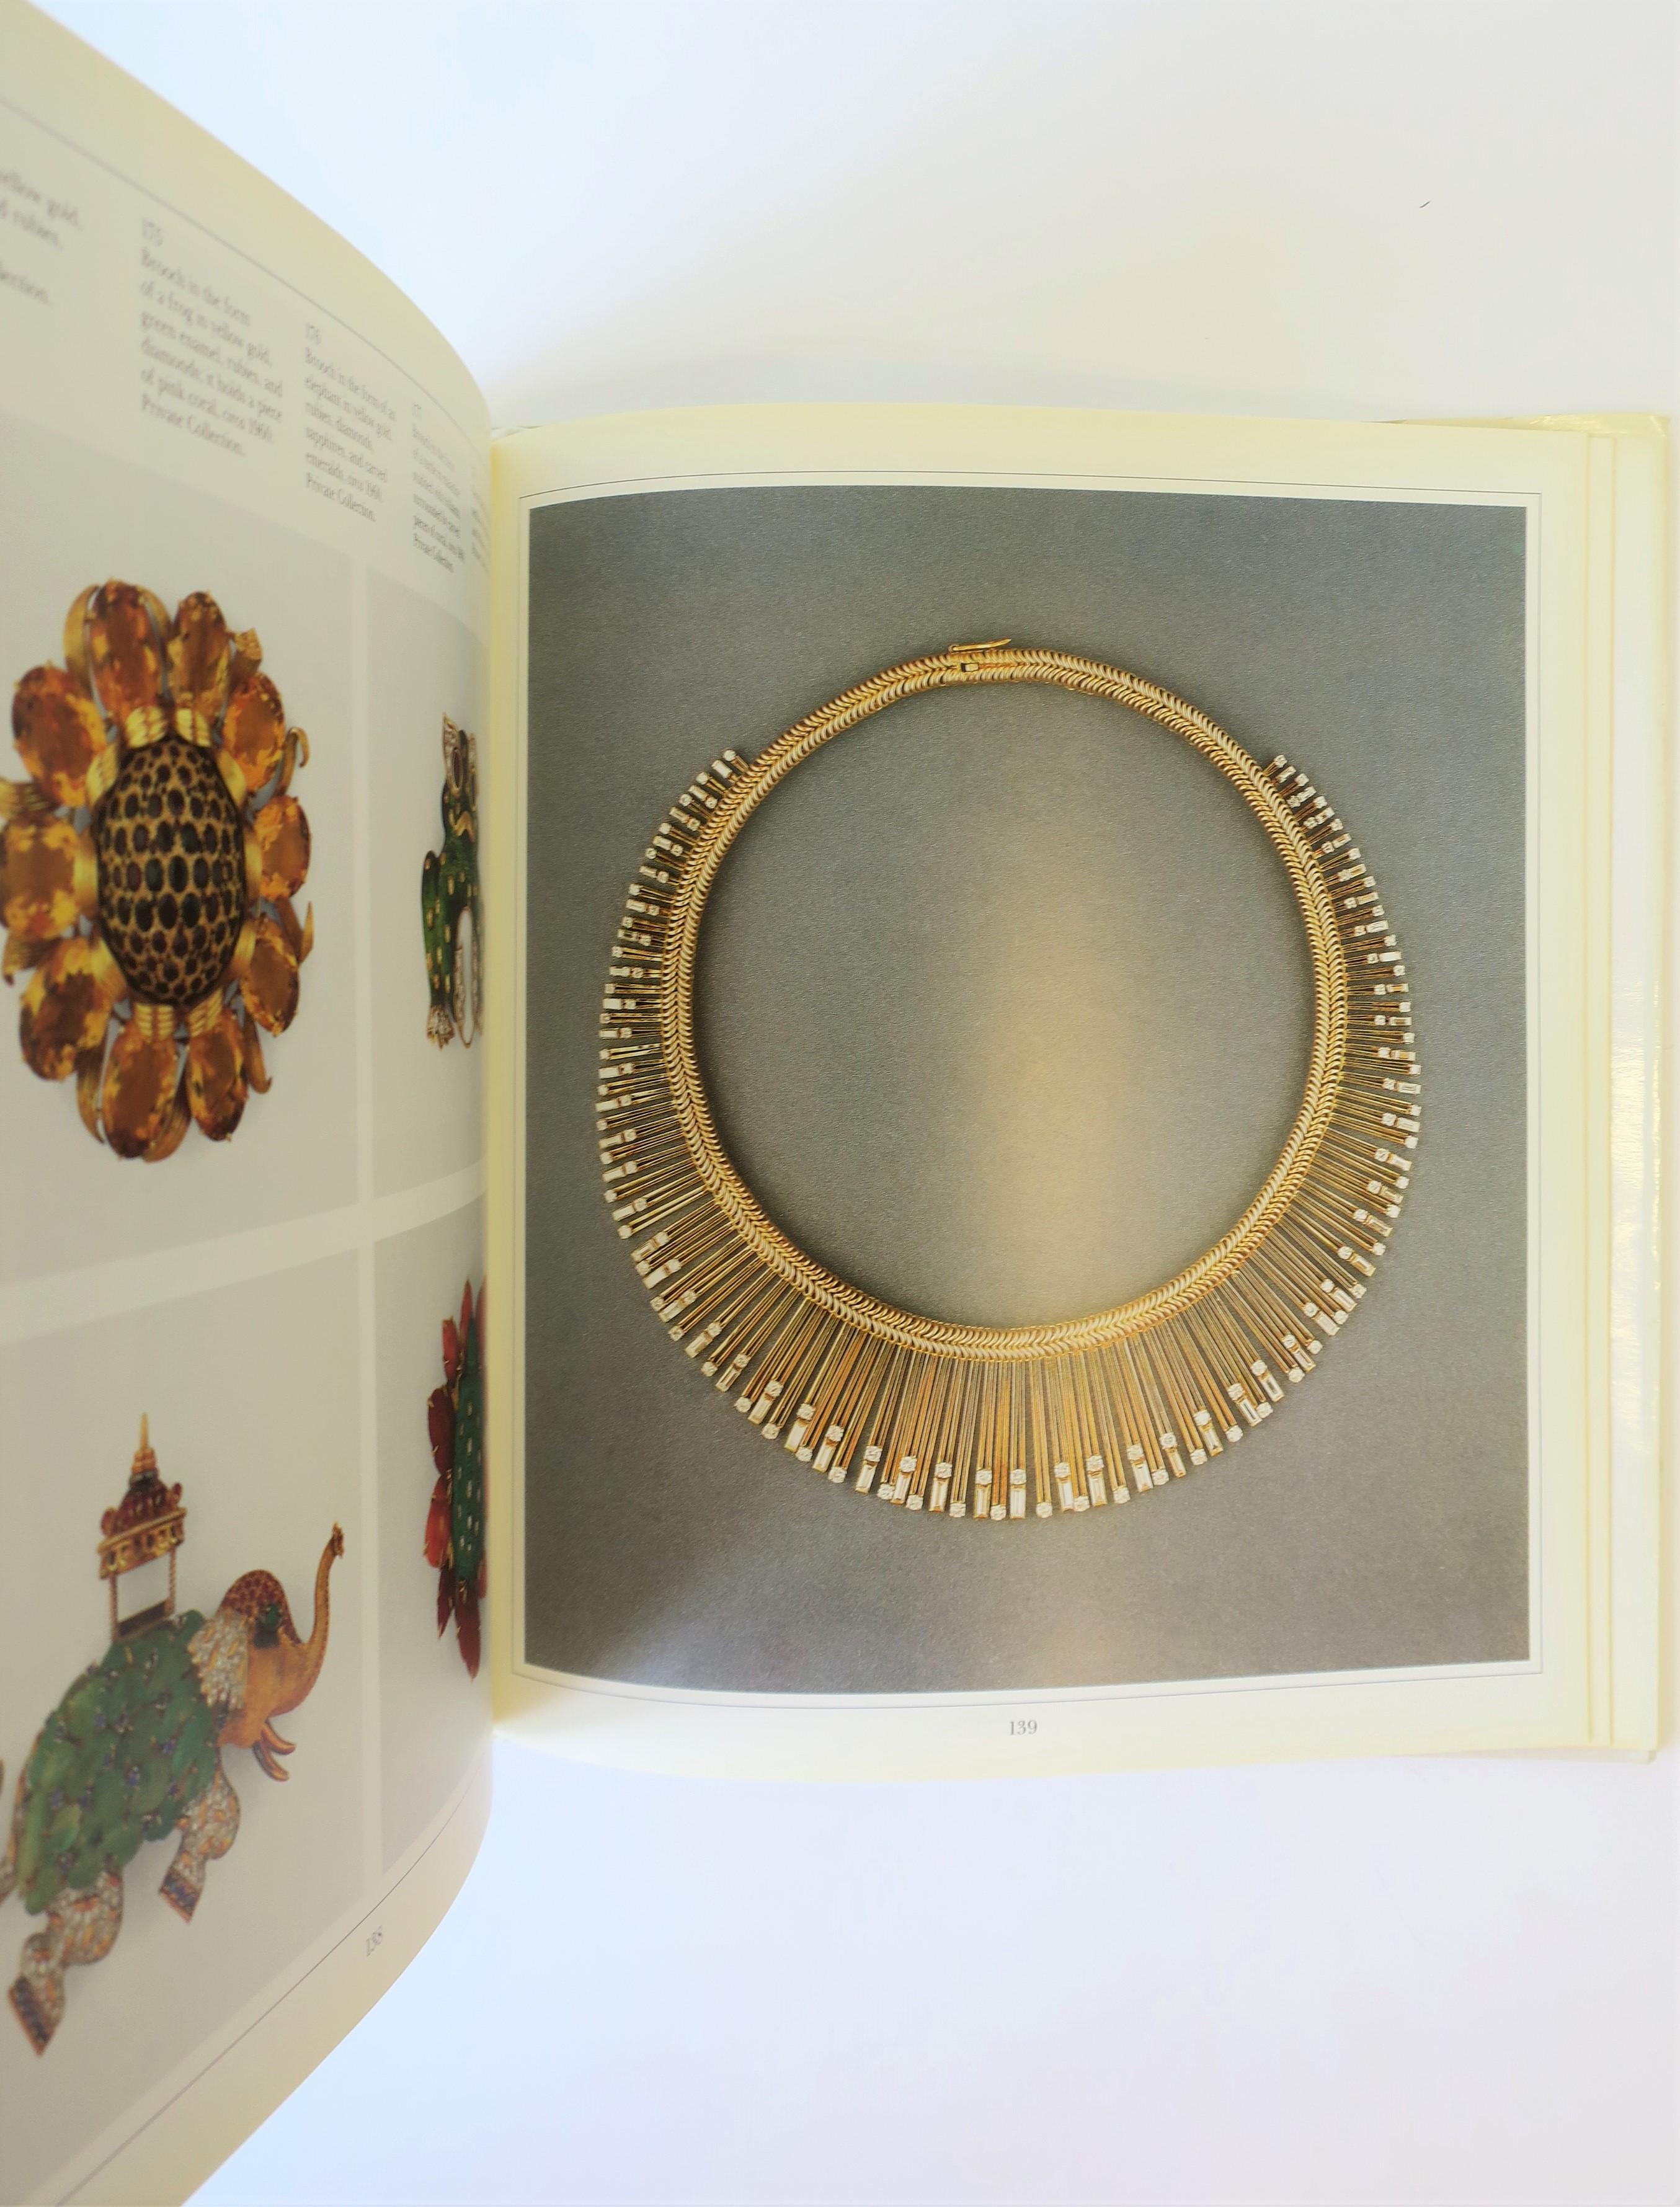 20th Century Jewelry Art Nouveau to Modern Coffee Table or Library Book, 1990s 9